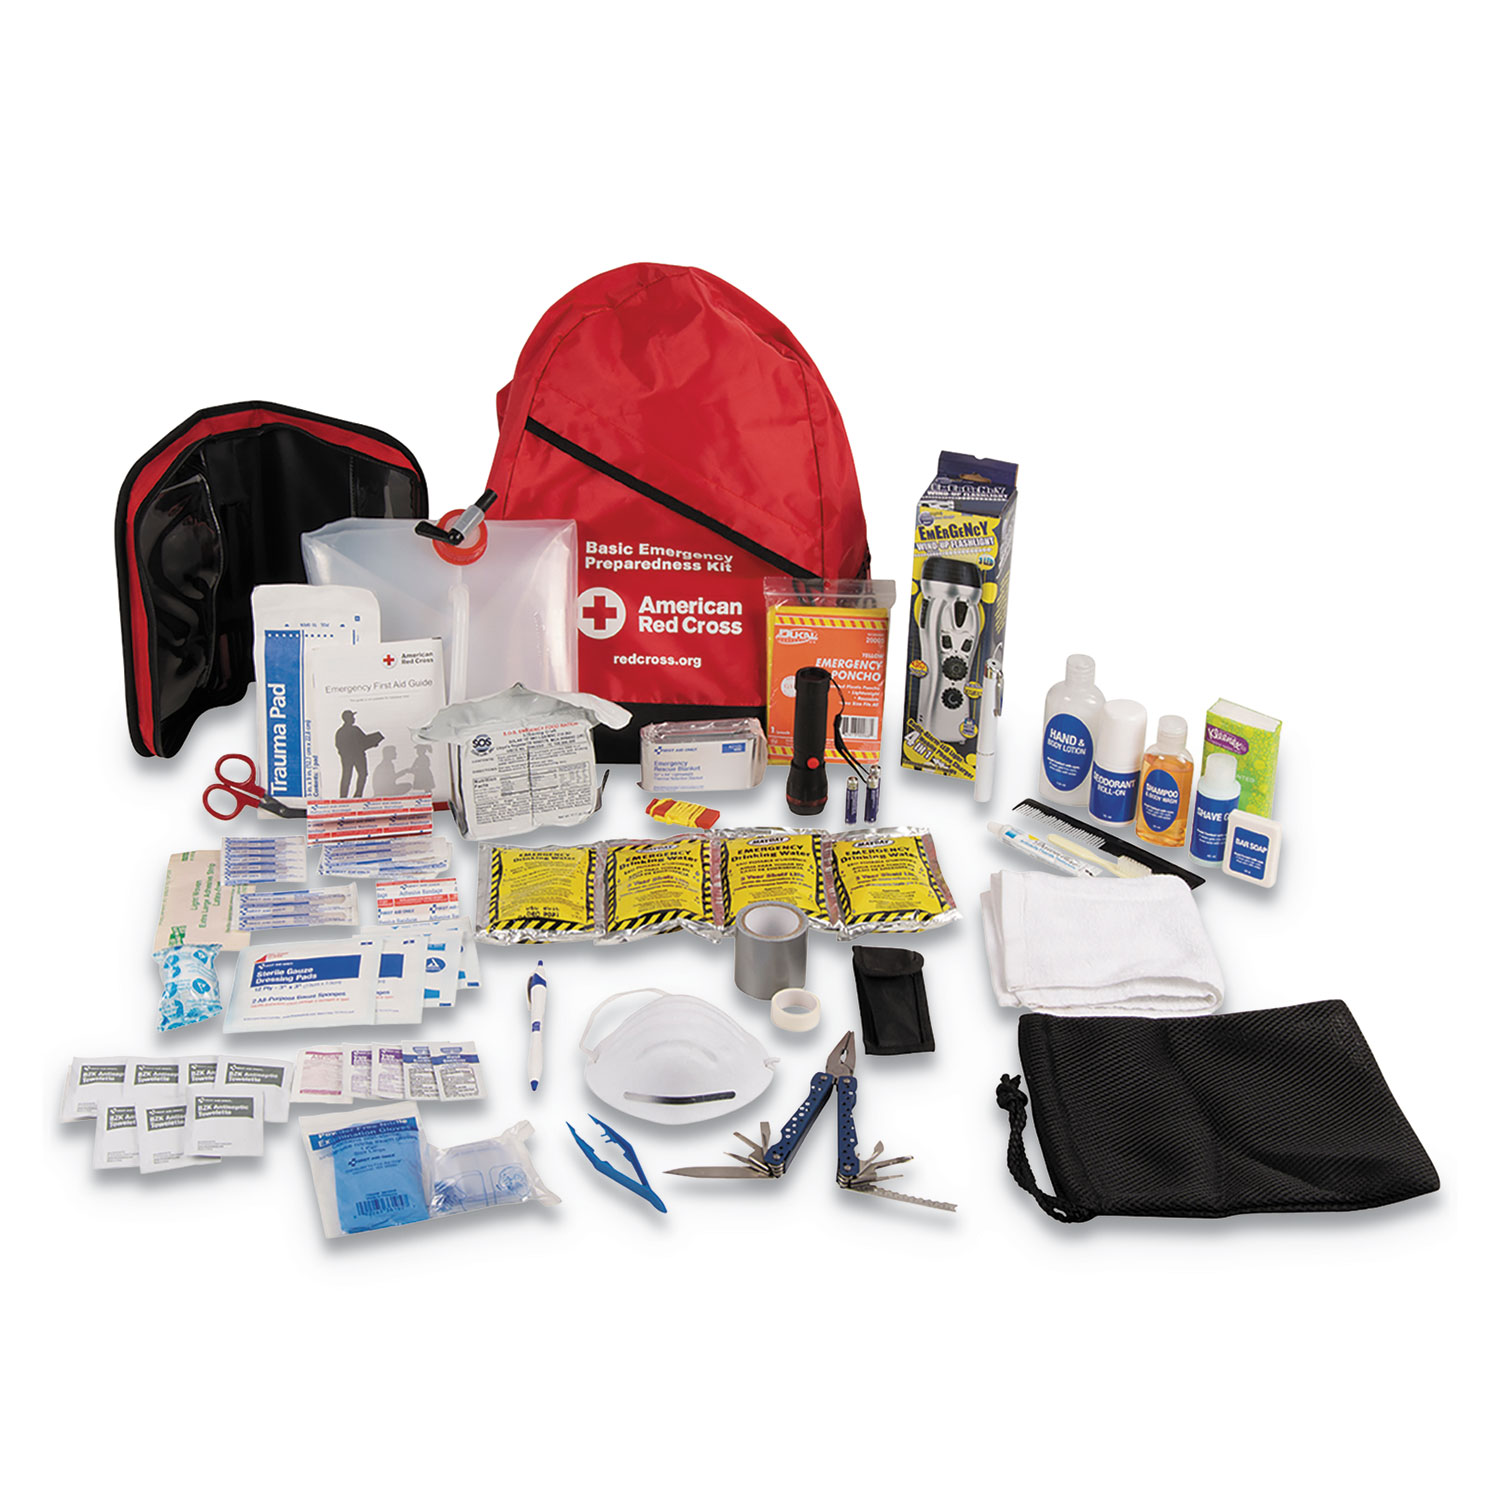 American Red Cross Deluxe Auto First Aid Kit